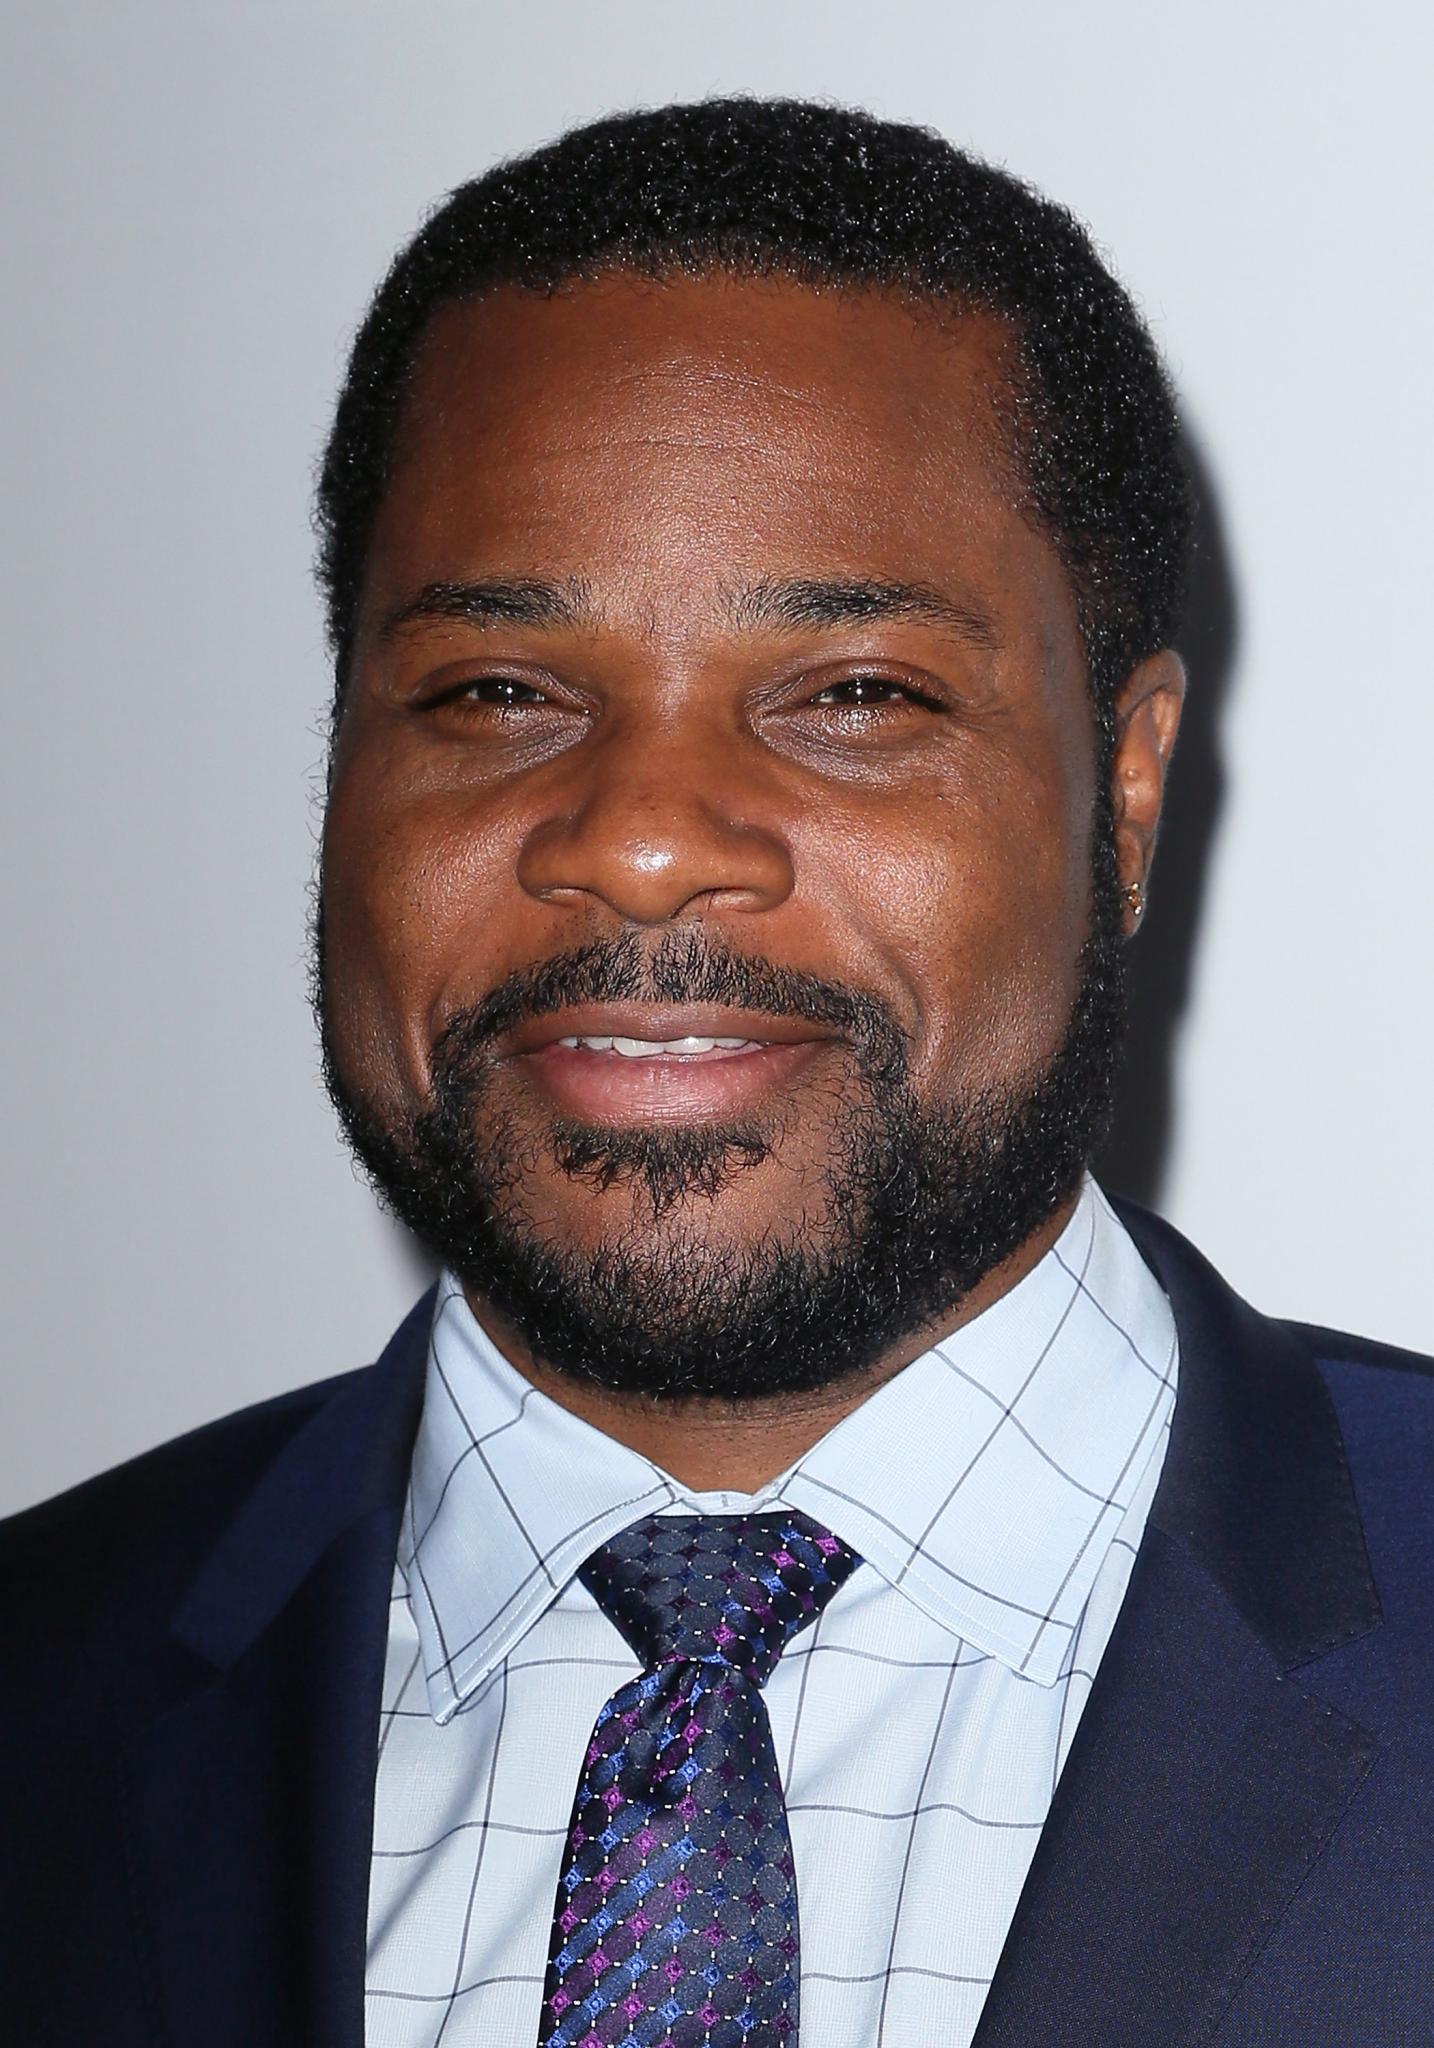 Pictures of Malcolm-Jamal Warner, Picture #139256 - Pictures Of Celebrities...